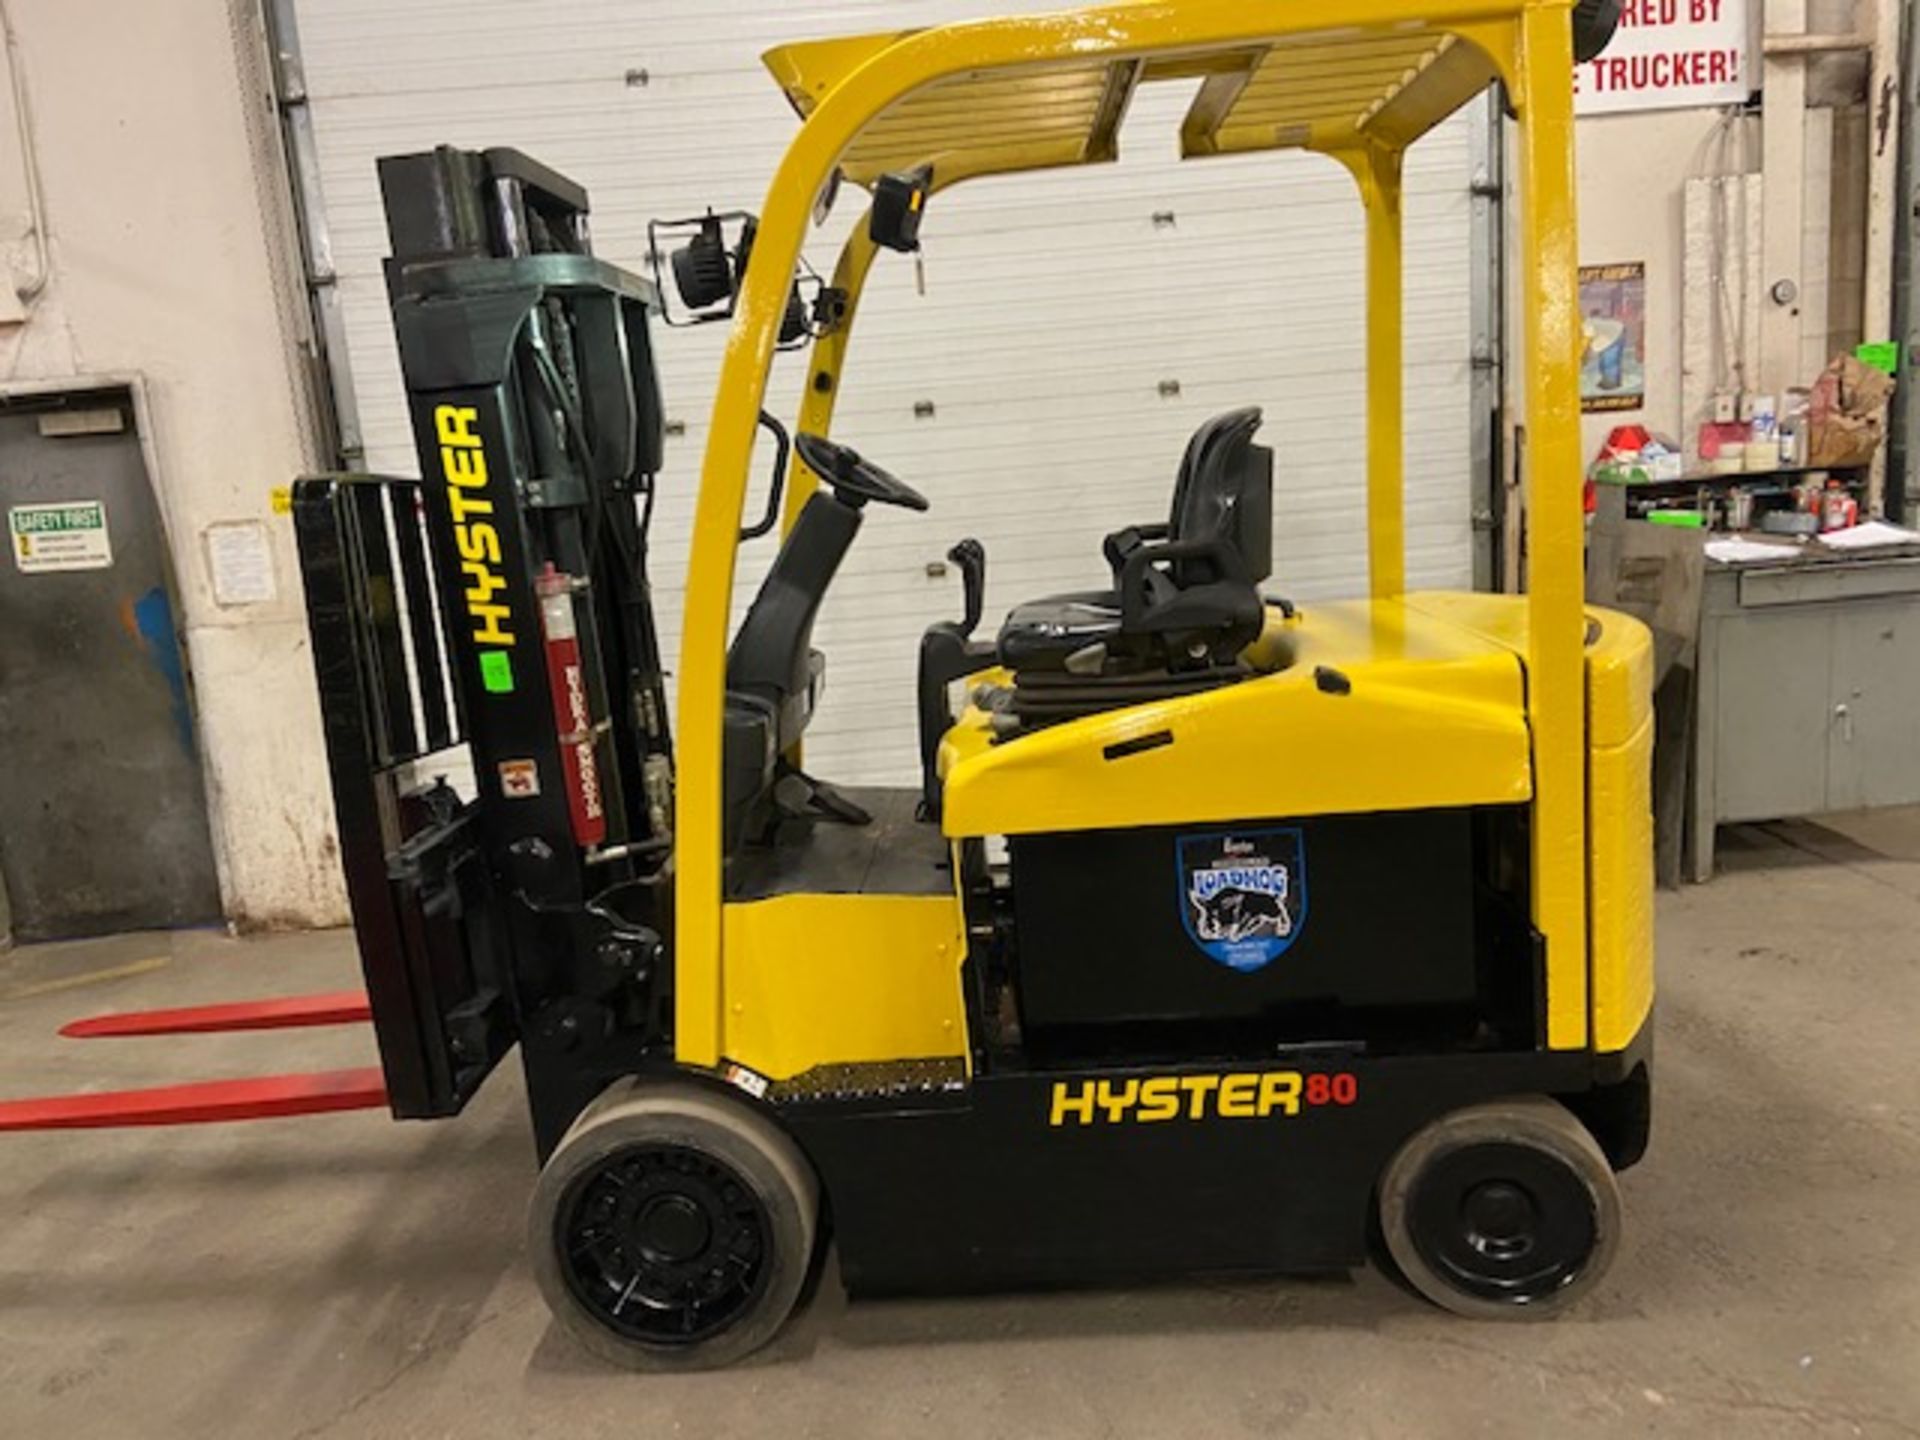 FREE CUSTOMS - 2014 Hyster 8000lbs Capacity Forklift Electric with sideshift and 3 stage mast